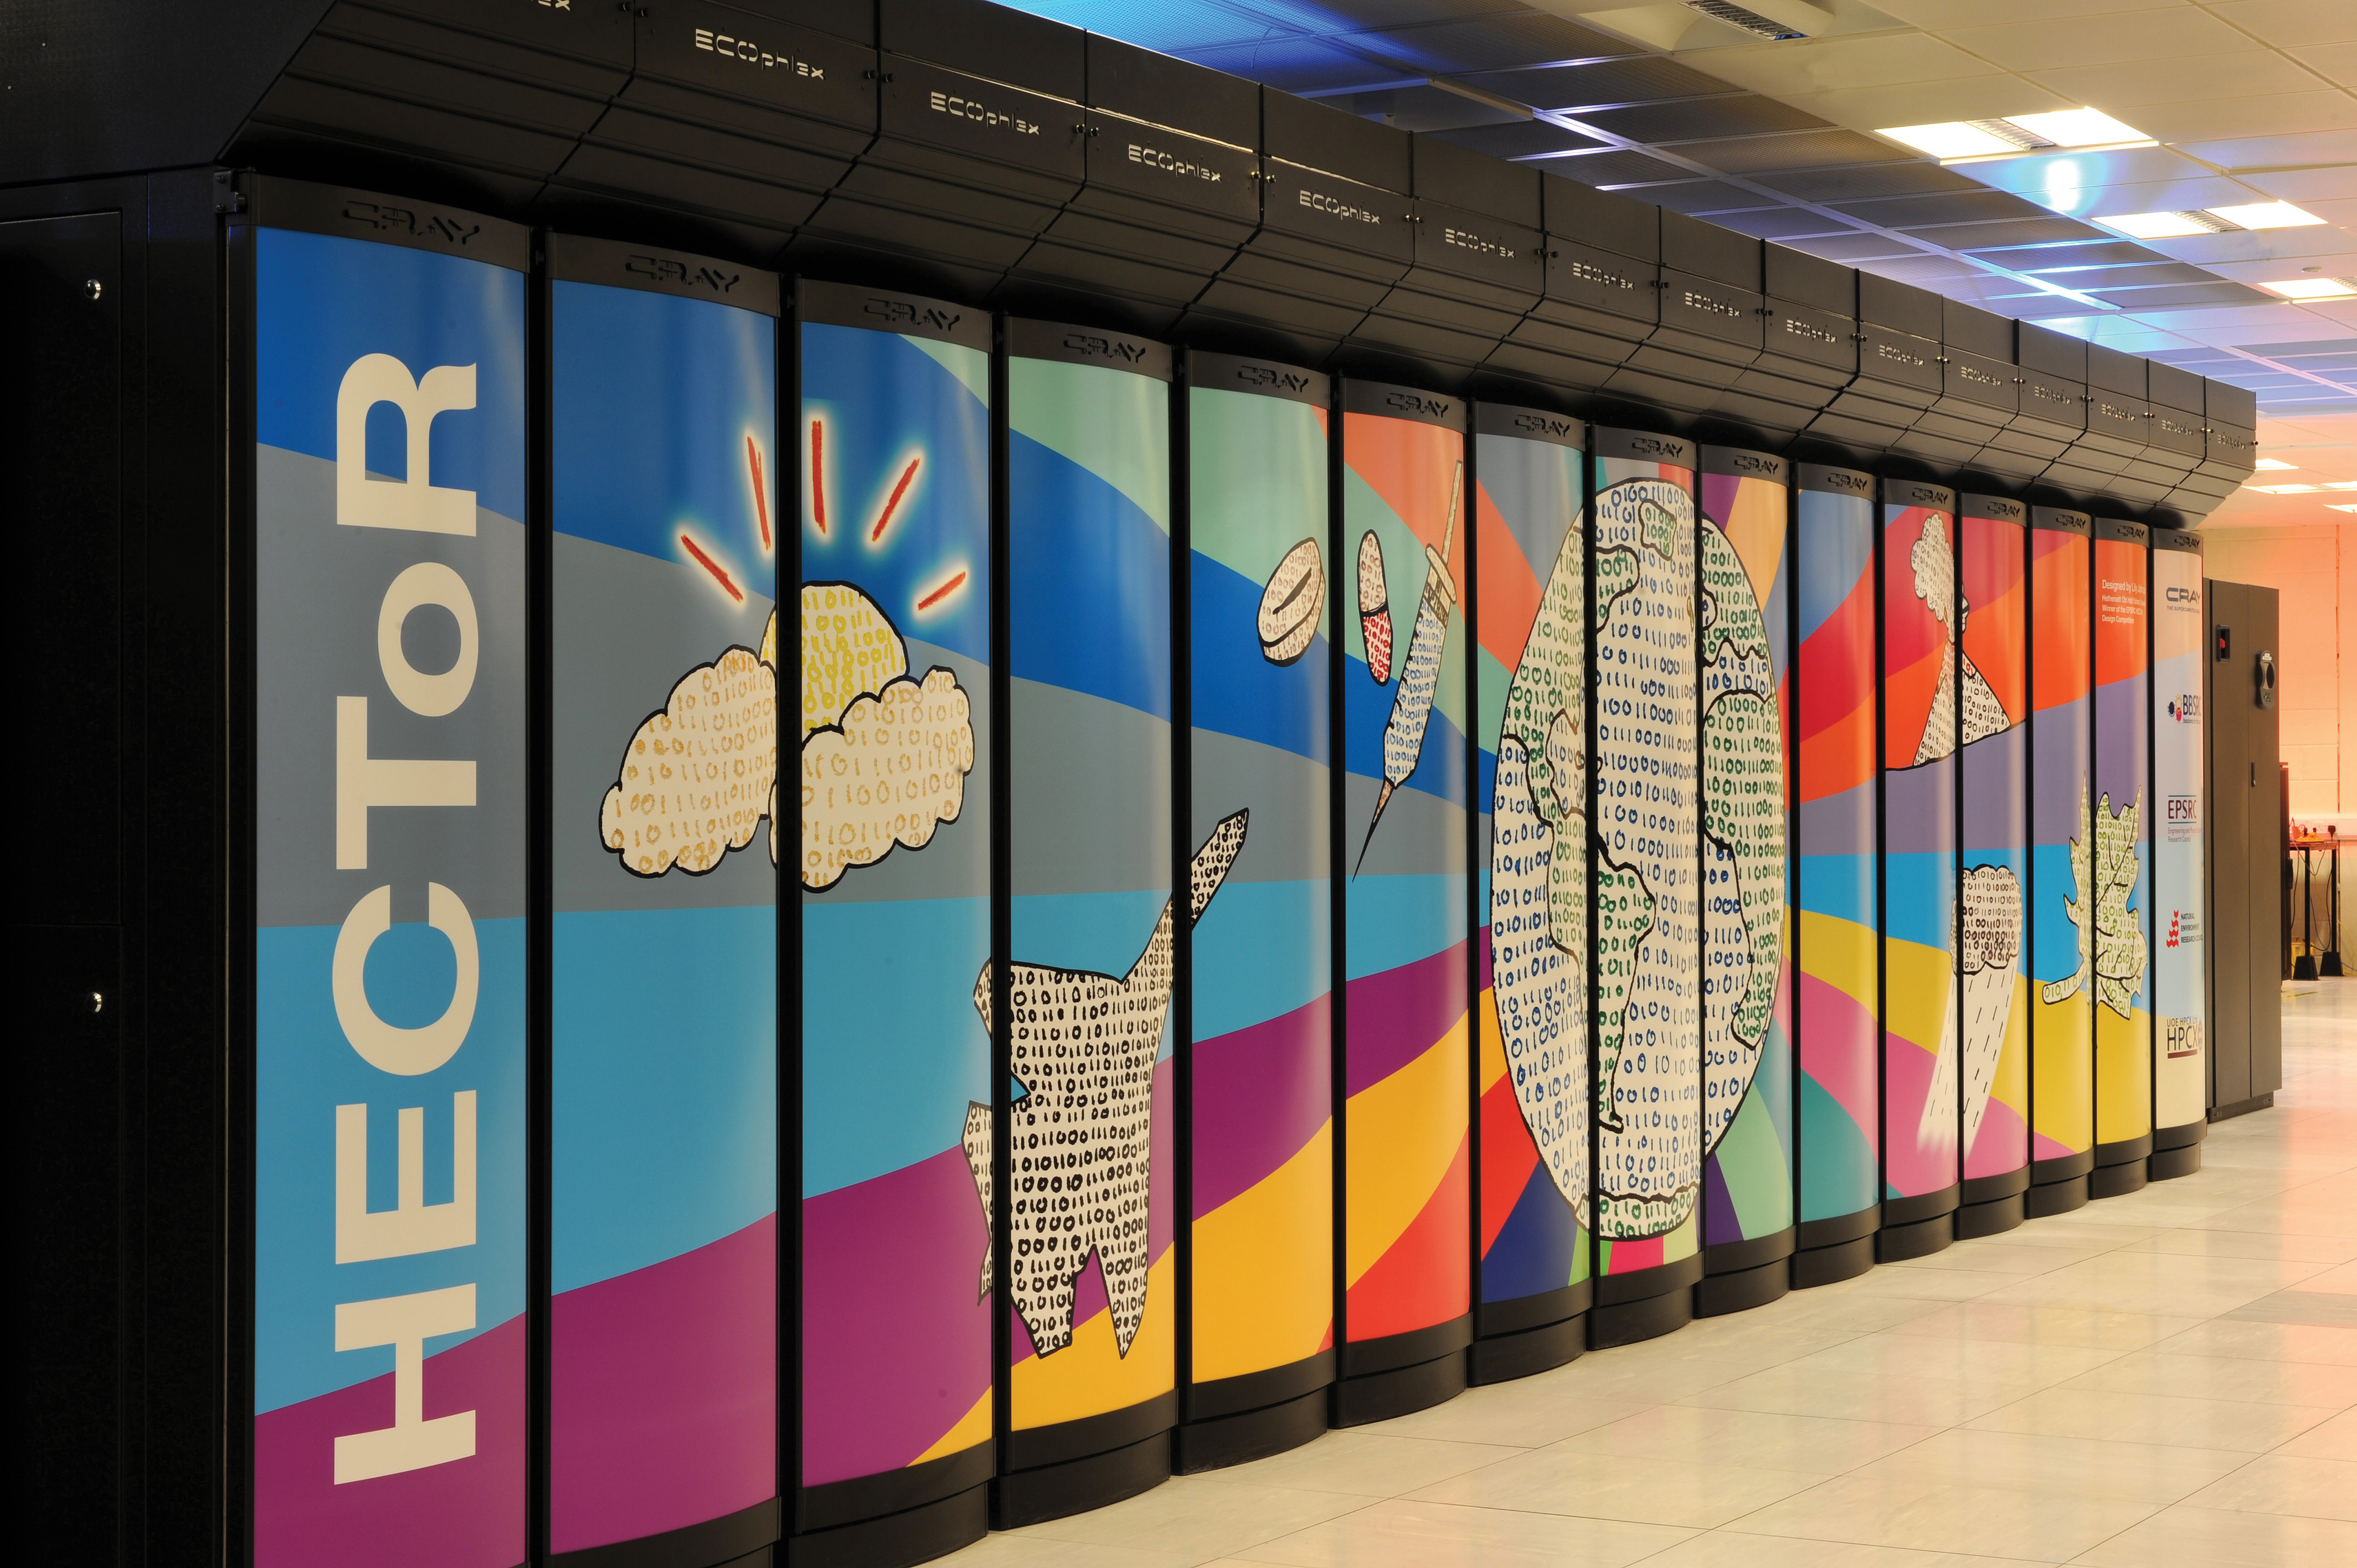 The HECTOR supercomputer, installed at Edinburgh in 2007.